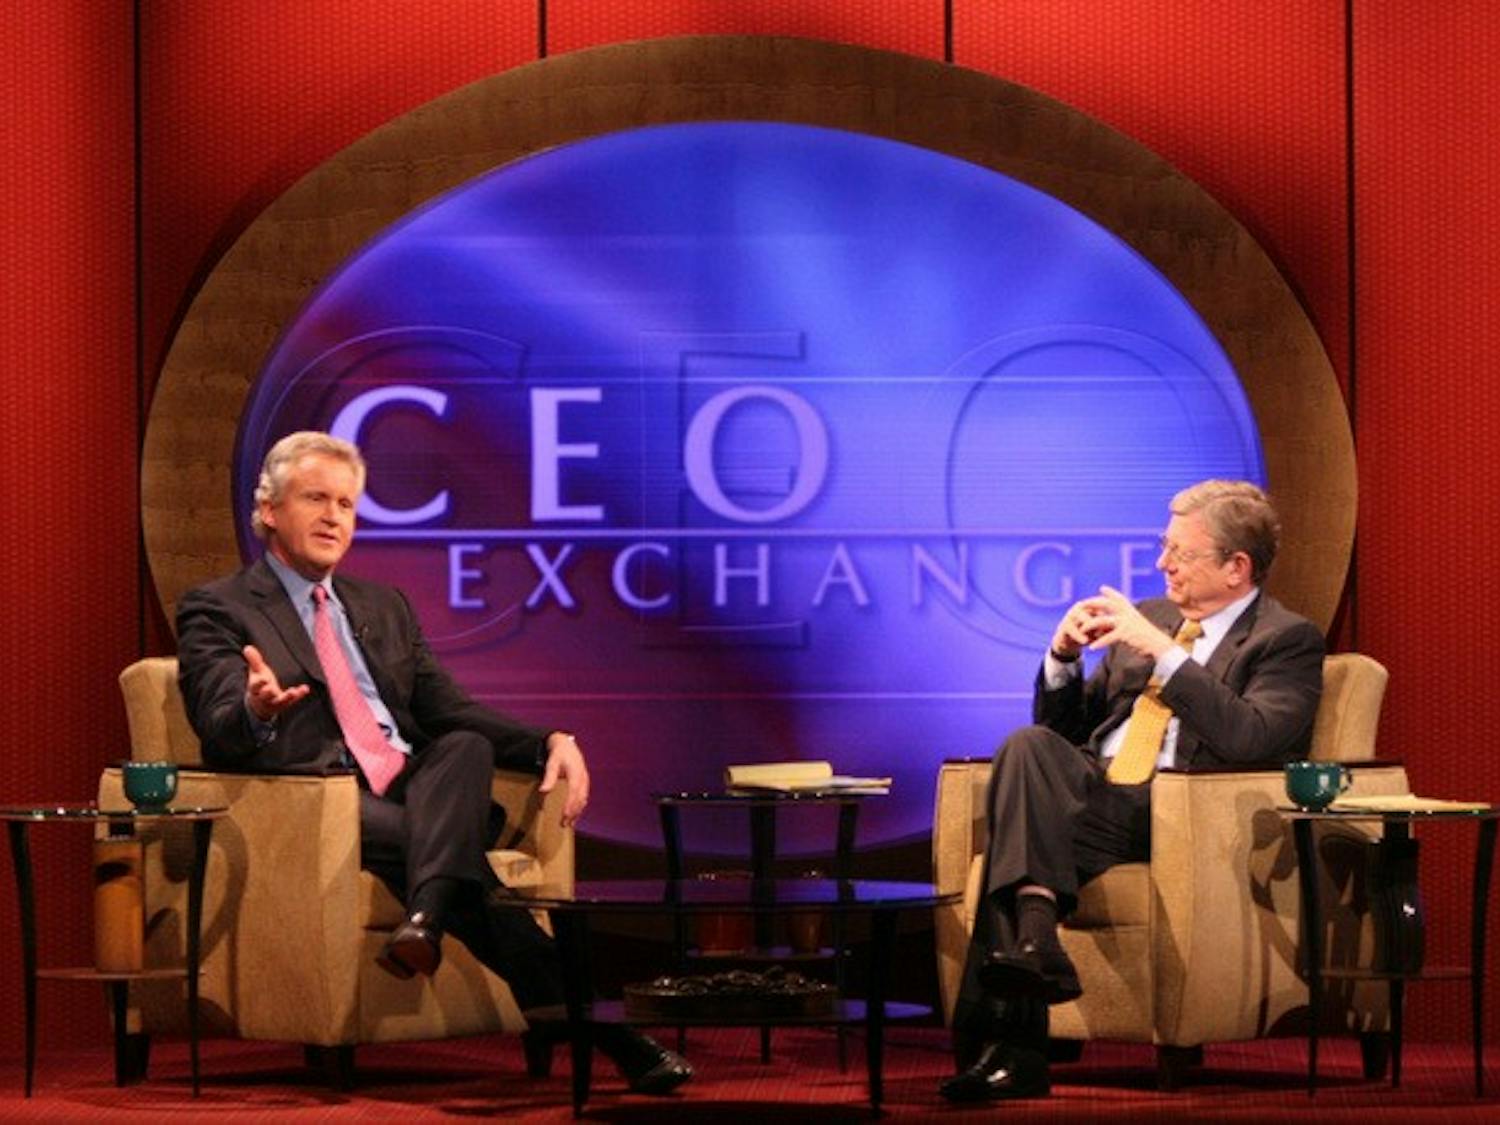 General Electric CEO Jeff Immelt '78 talks business with host Jeff Greenfield in a taped interview for the show CEO Exchange.